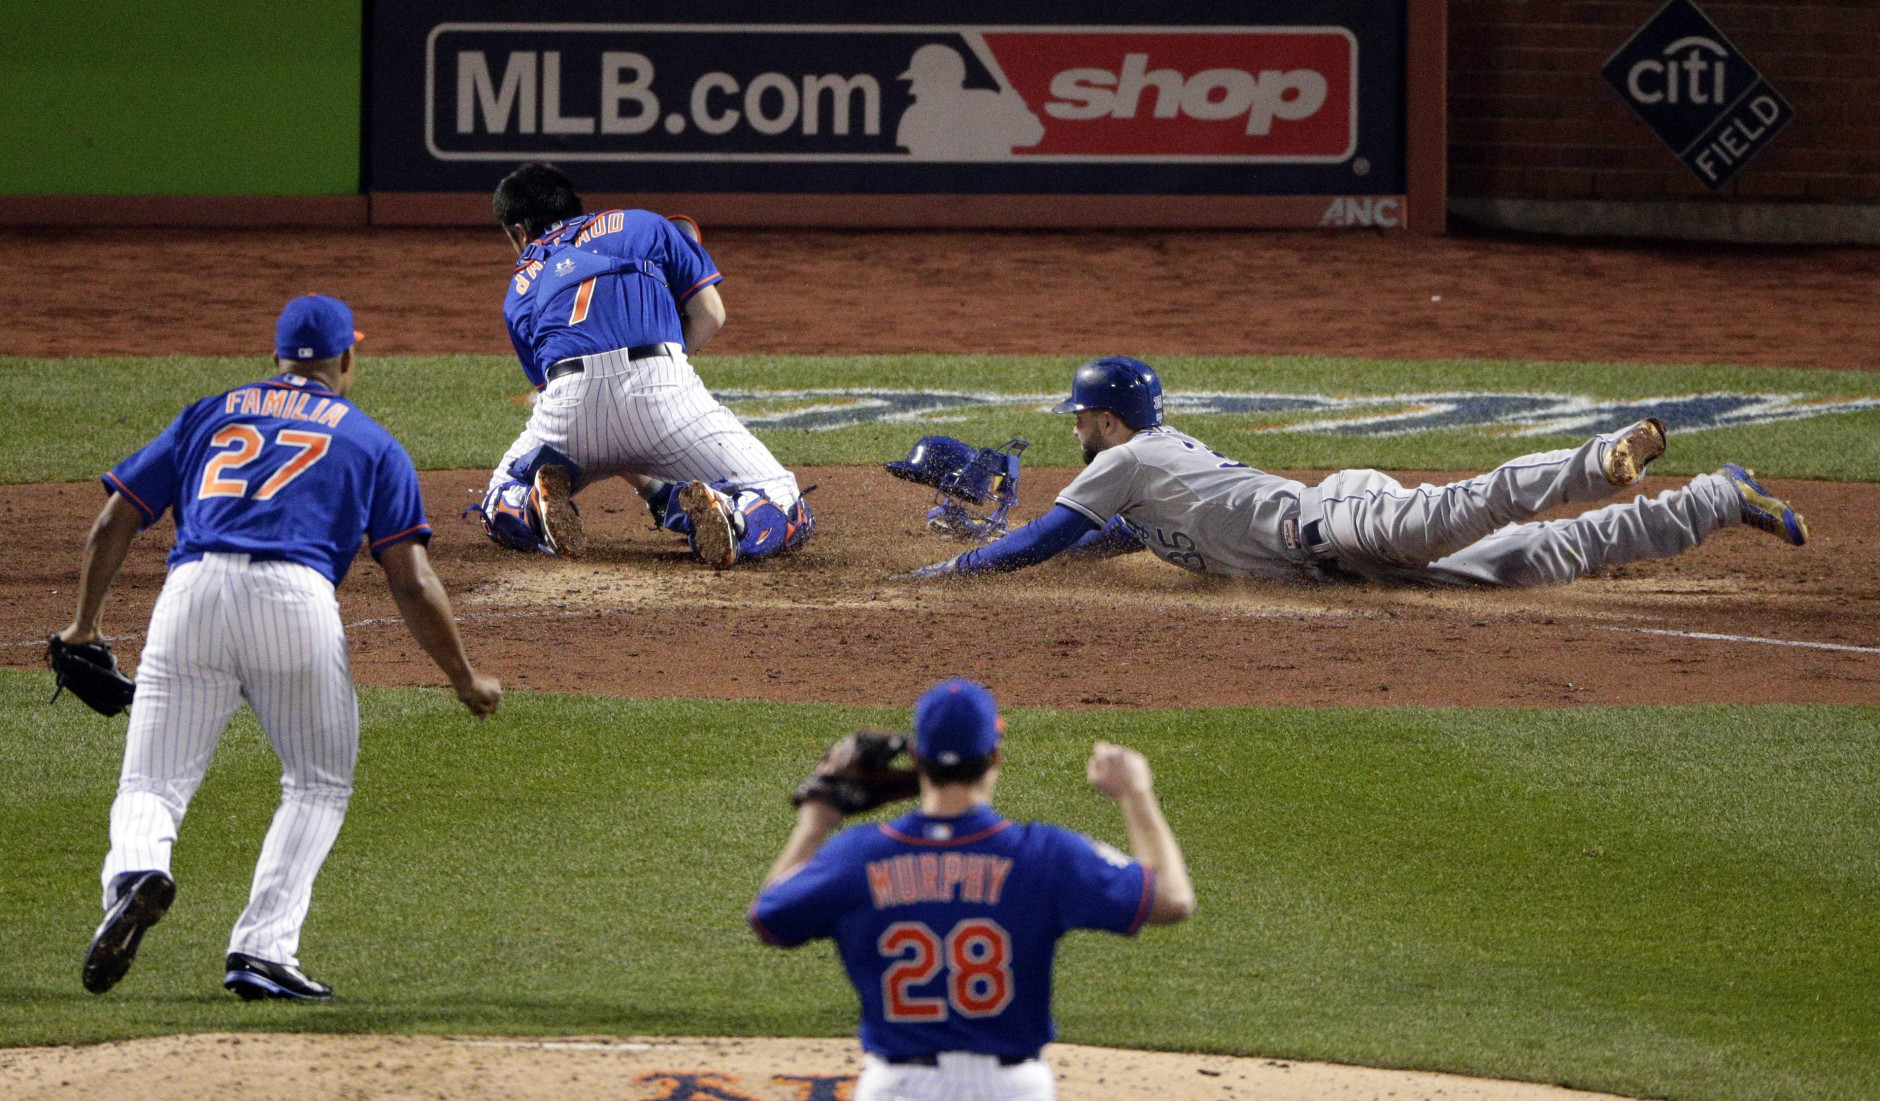 Kansas City Royals' Eric Hosmer right, scores past New York Mets catcher Travis d'Arnaud as relief pitcher Jeurys Familia (27) and second baseman Daniel Murphy (28) look on during the ninth inning of Game 5 of the Major League Baseball World Series Sunday, Nov. 1, 2015, in New York. (AP Photo/Charlie Riedel)